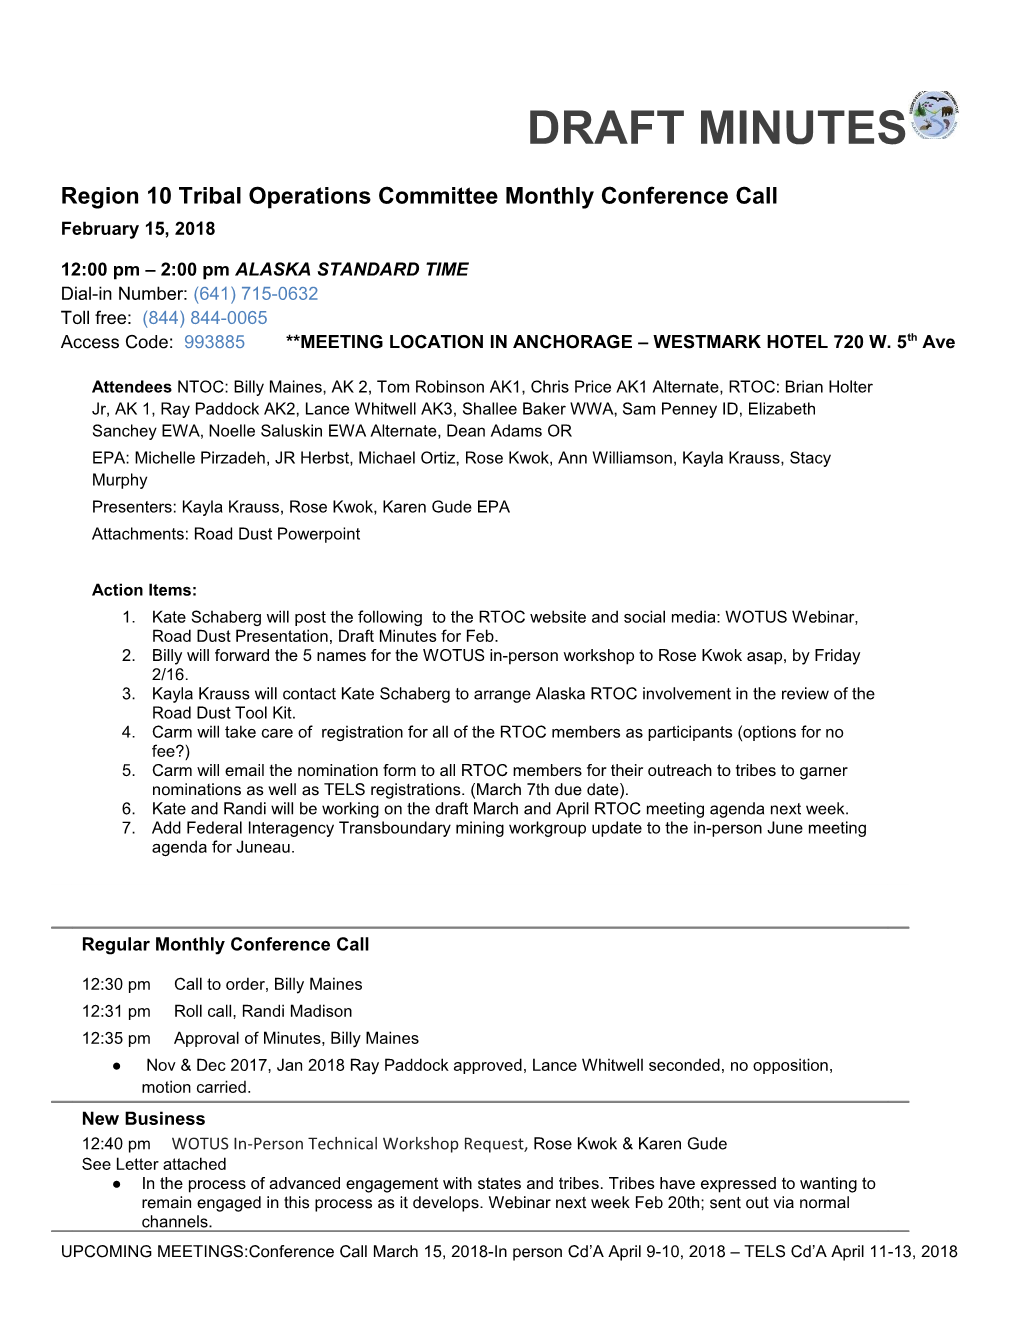 Region 10 Tribal Operations Committee Monthly Conference Call